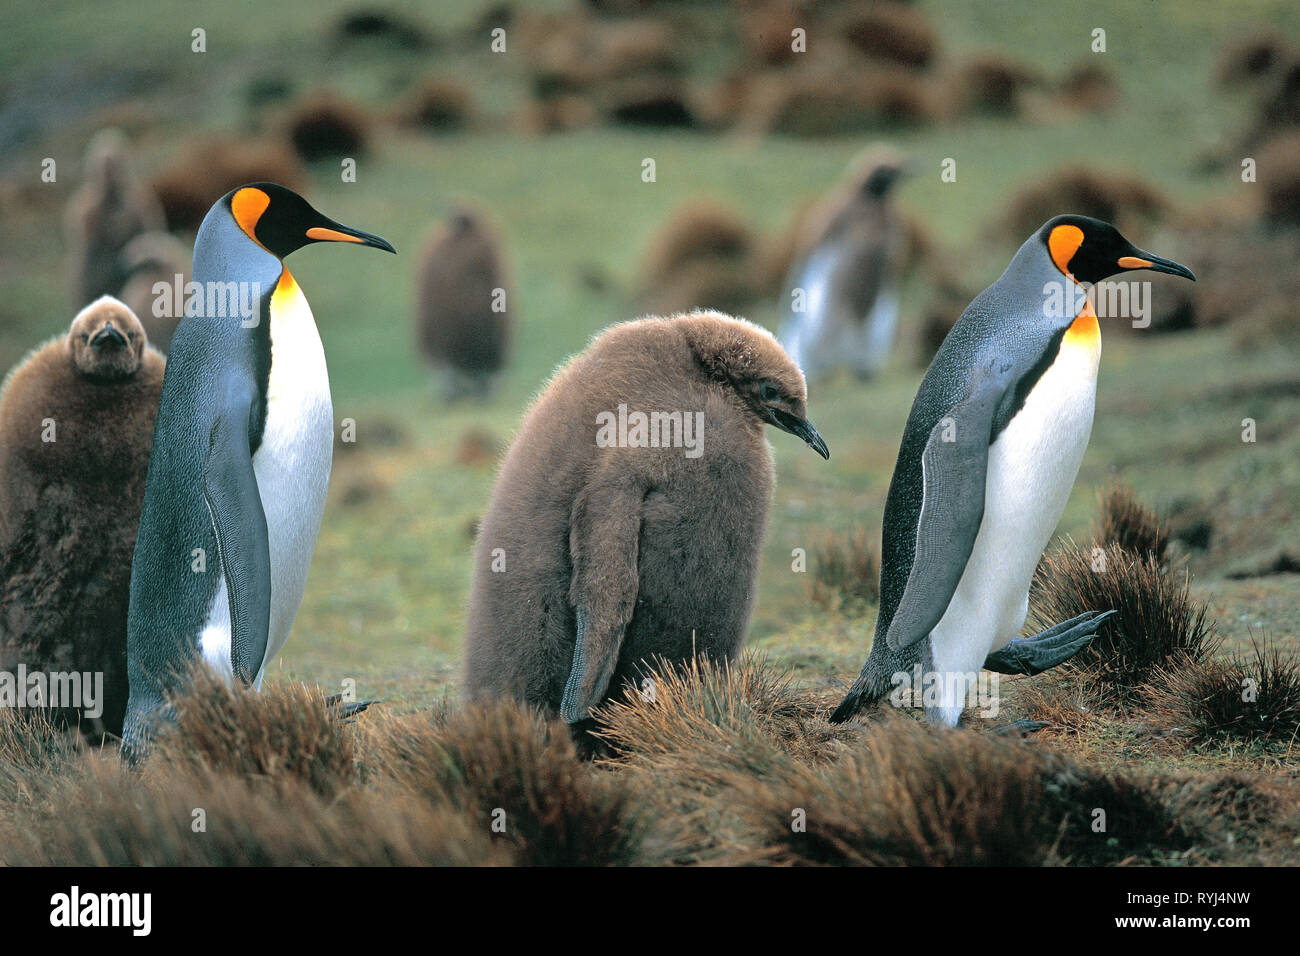 King penguins (Aptenodytes patagonicus), young and adults, Volunteer Point, Falkland Islands, South Atlantic Ocean Stock Photo